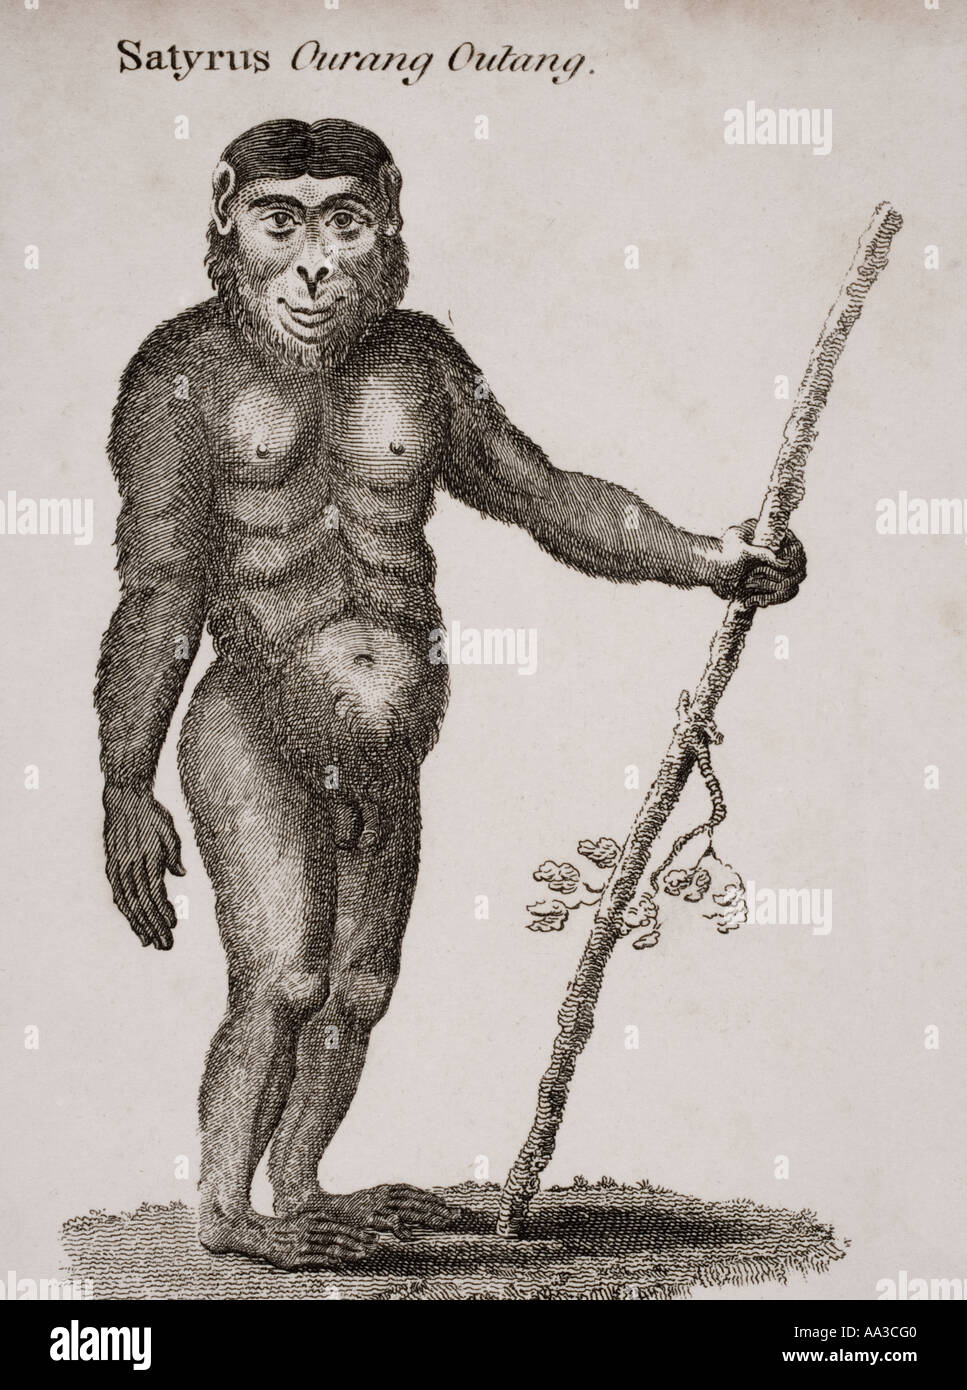 Satyrus Ourang Outang Engraved by Barlow 18th century Stock Photo